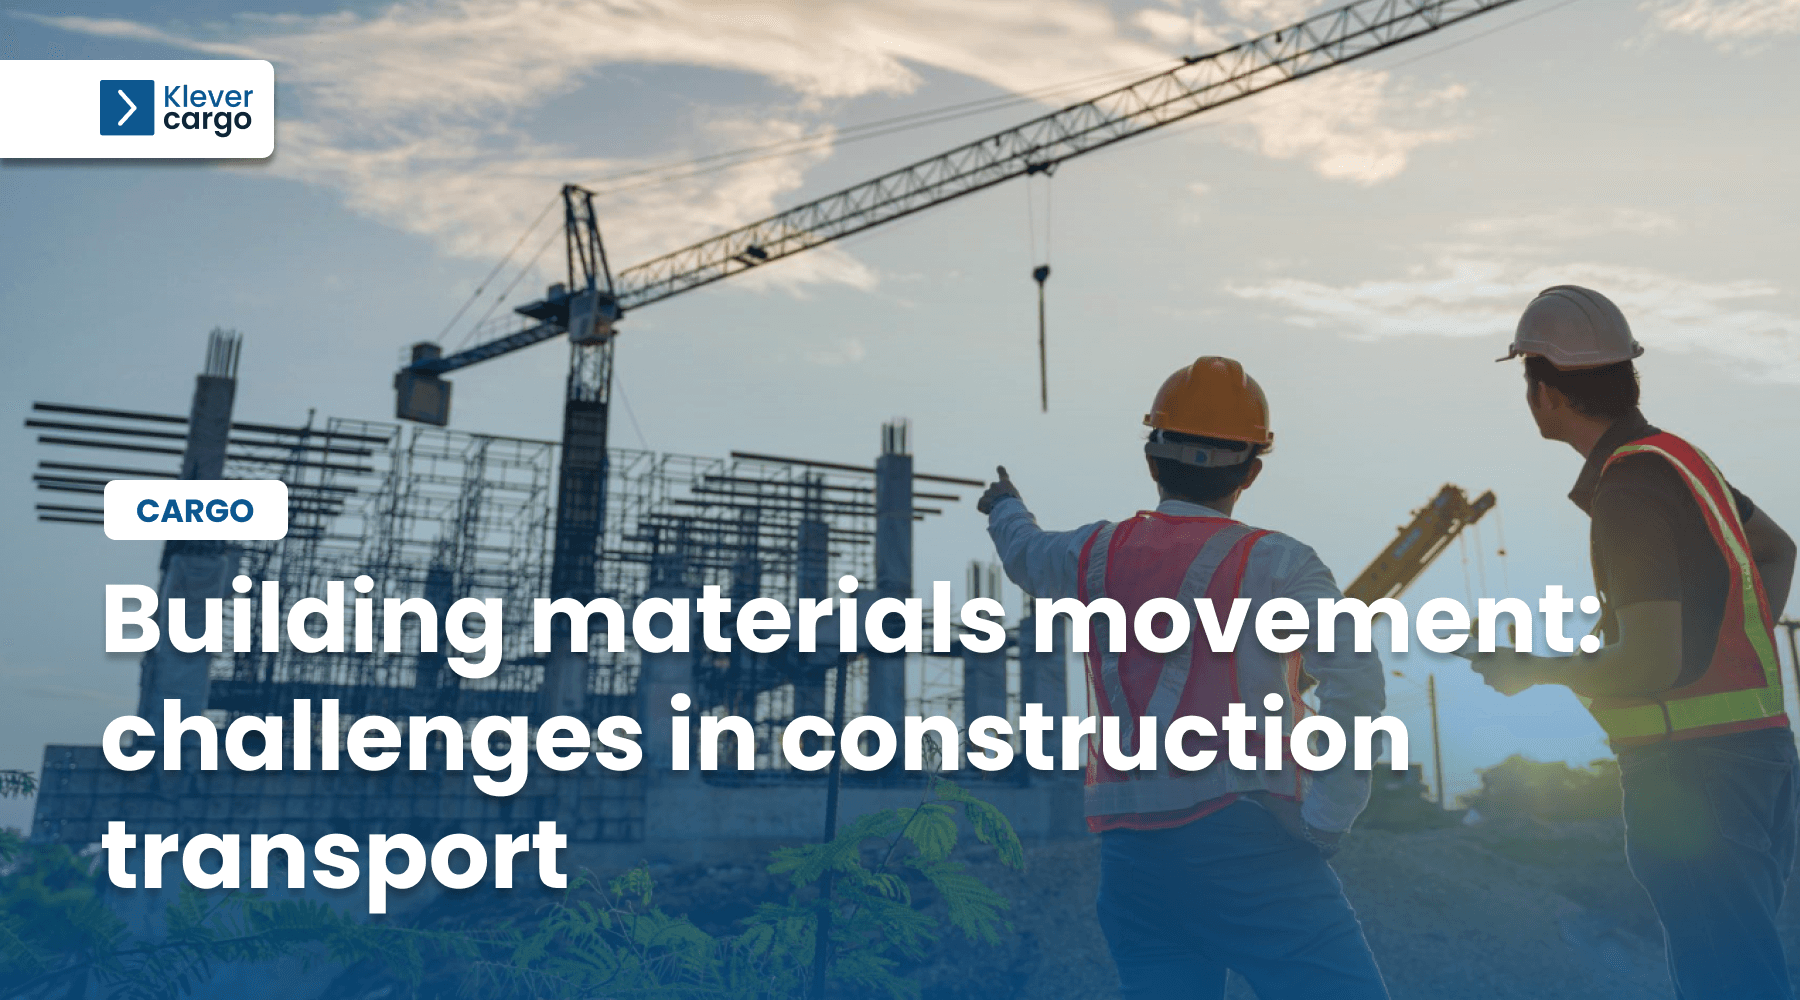 Building materials movement: challenges in construction transport